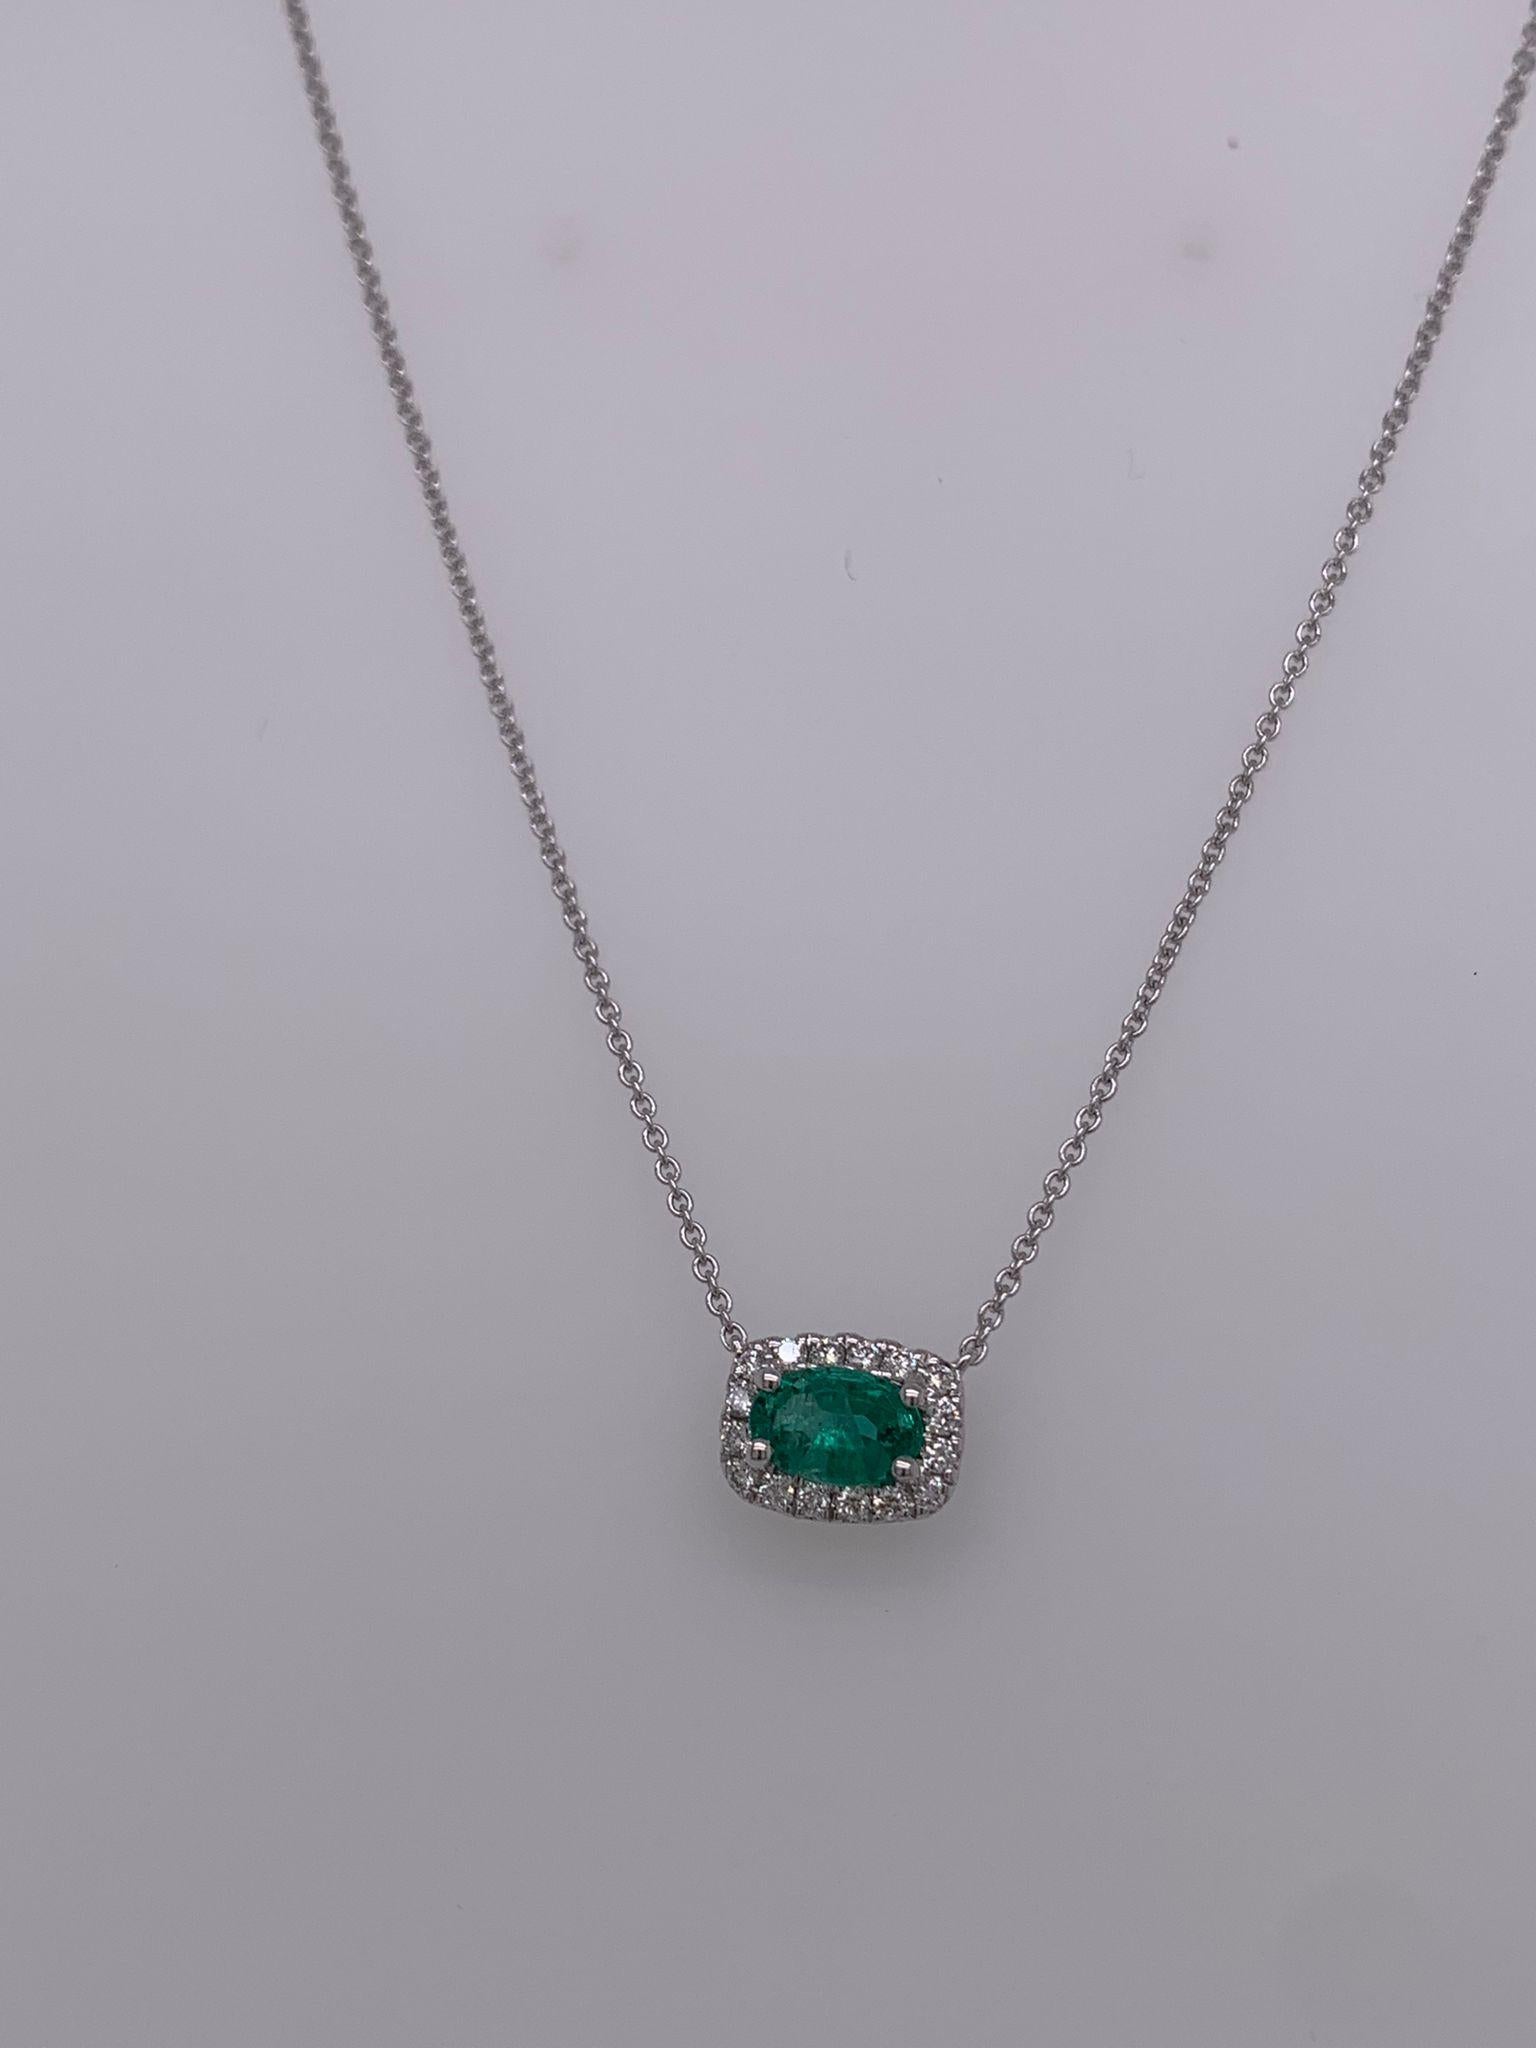 Oval Emerald weighing .44 cts
Measuring (5.5x3.5) mm
Diamonds weighing .10 cts
Set in 18K white gold 
